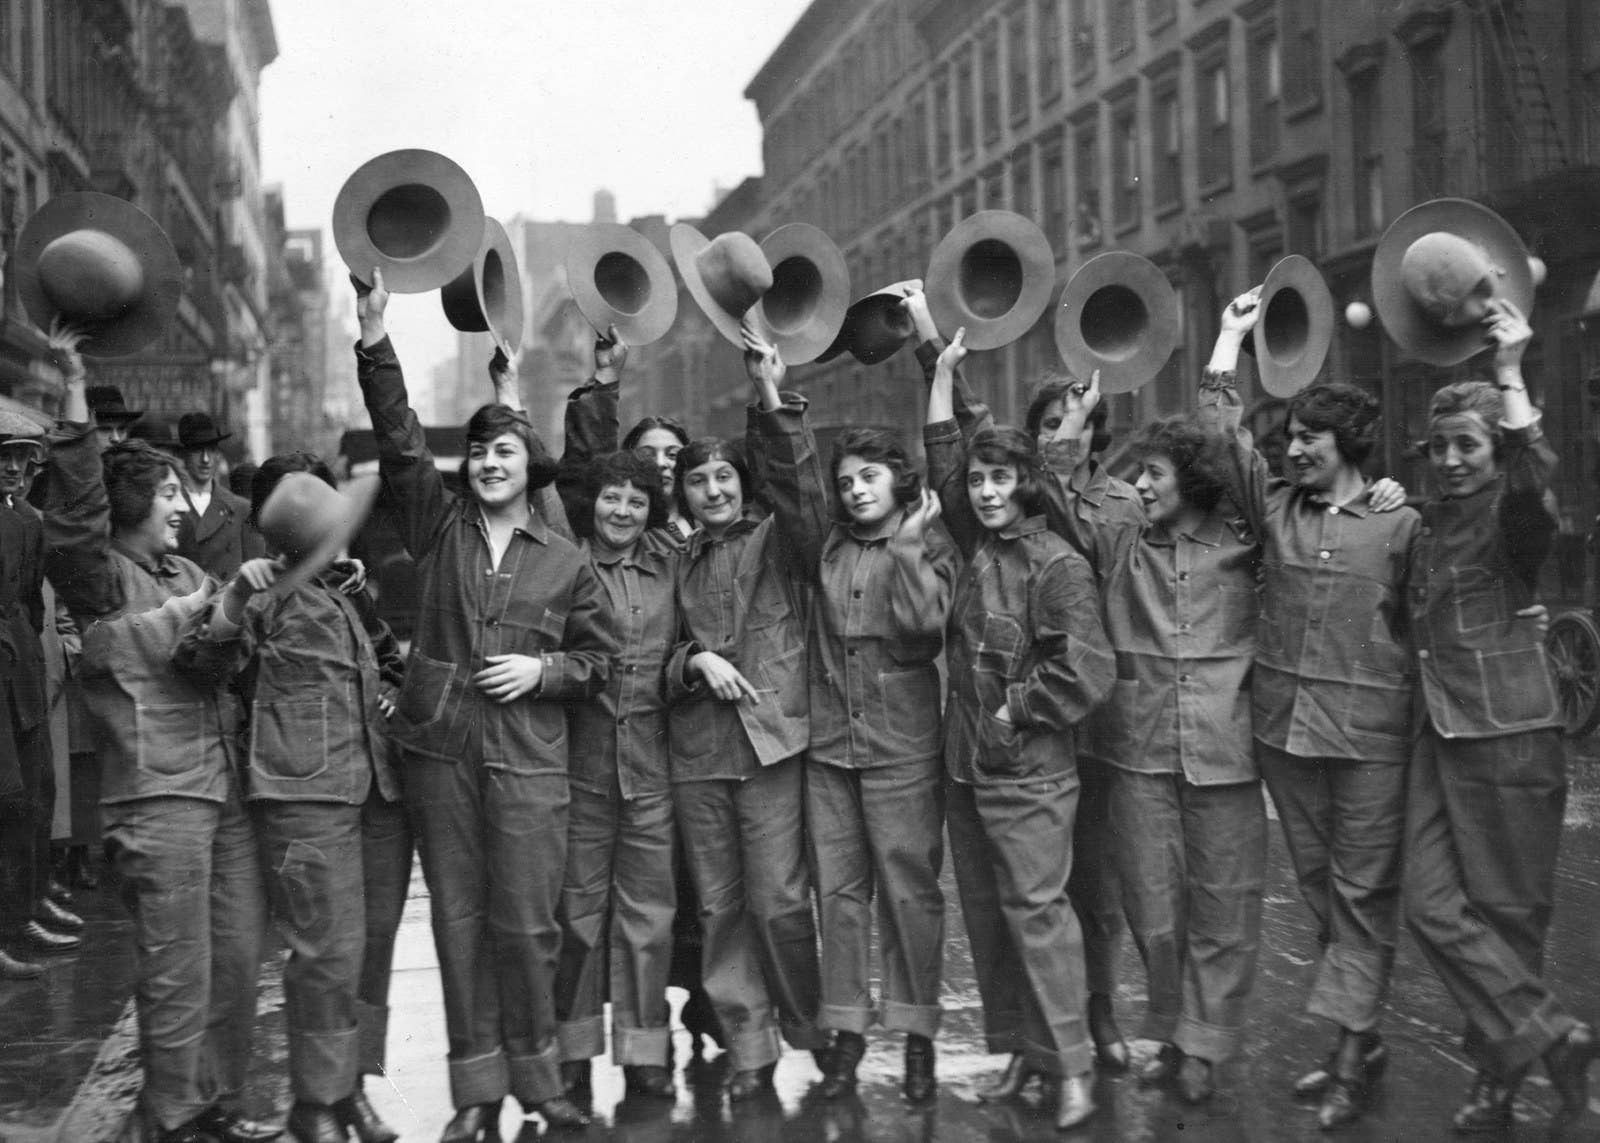 Women parade in their military uniforms in New York City, circa 1918.